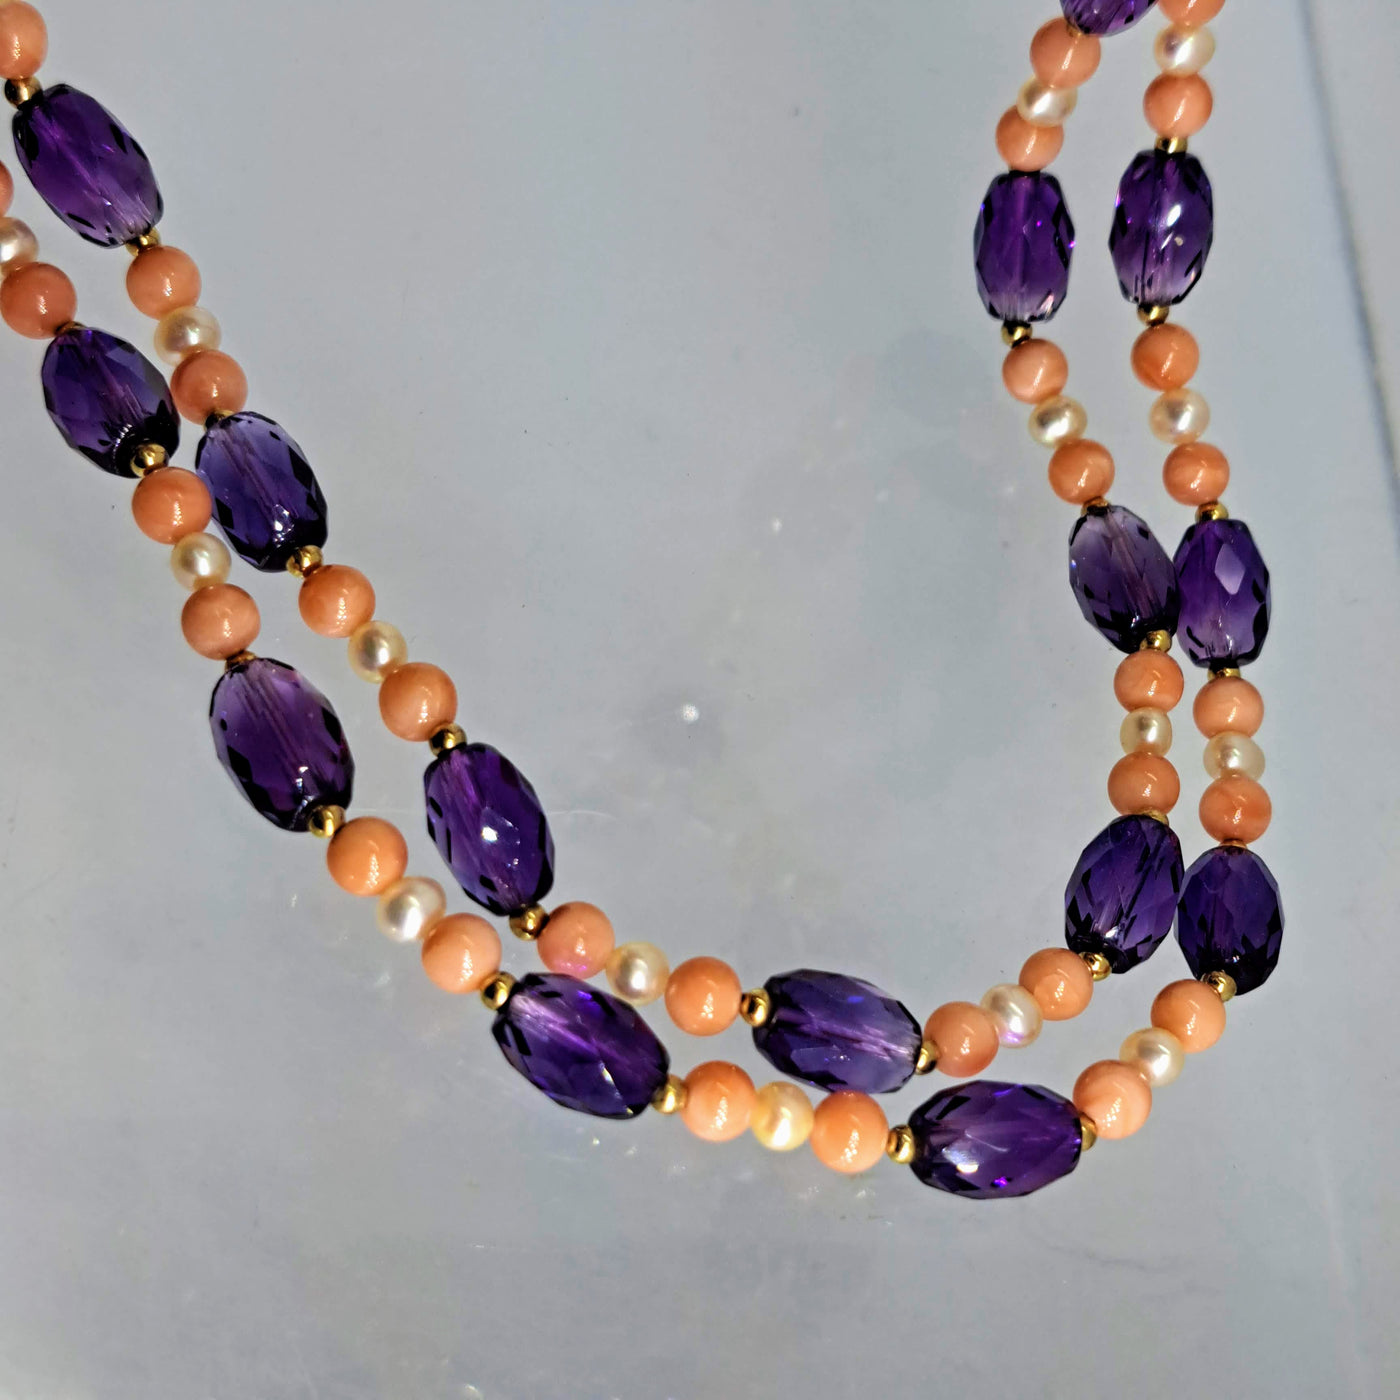 "Lilly-Girl" 17" Necklace - Angel Skin Coral (Ethically Sourced), Petite Pearls, Amethyst, 14k Gold